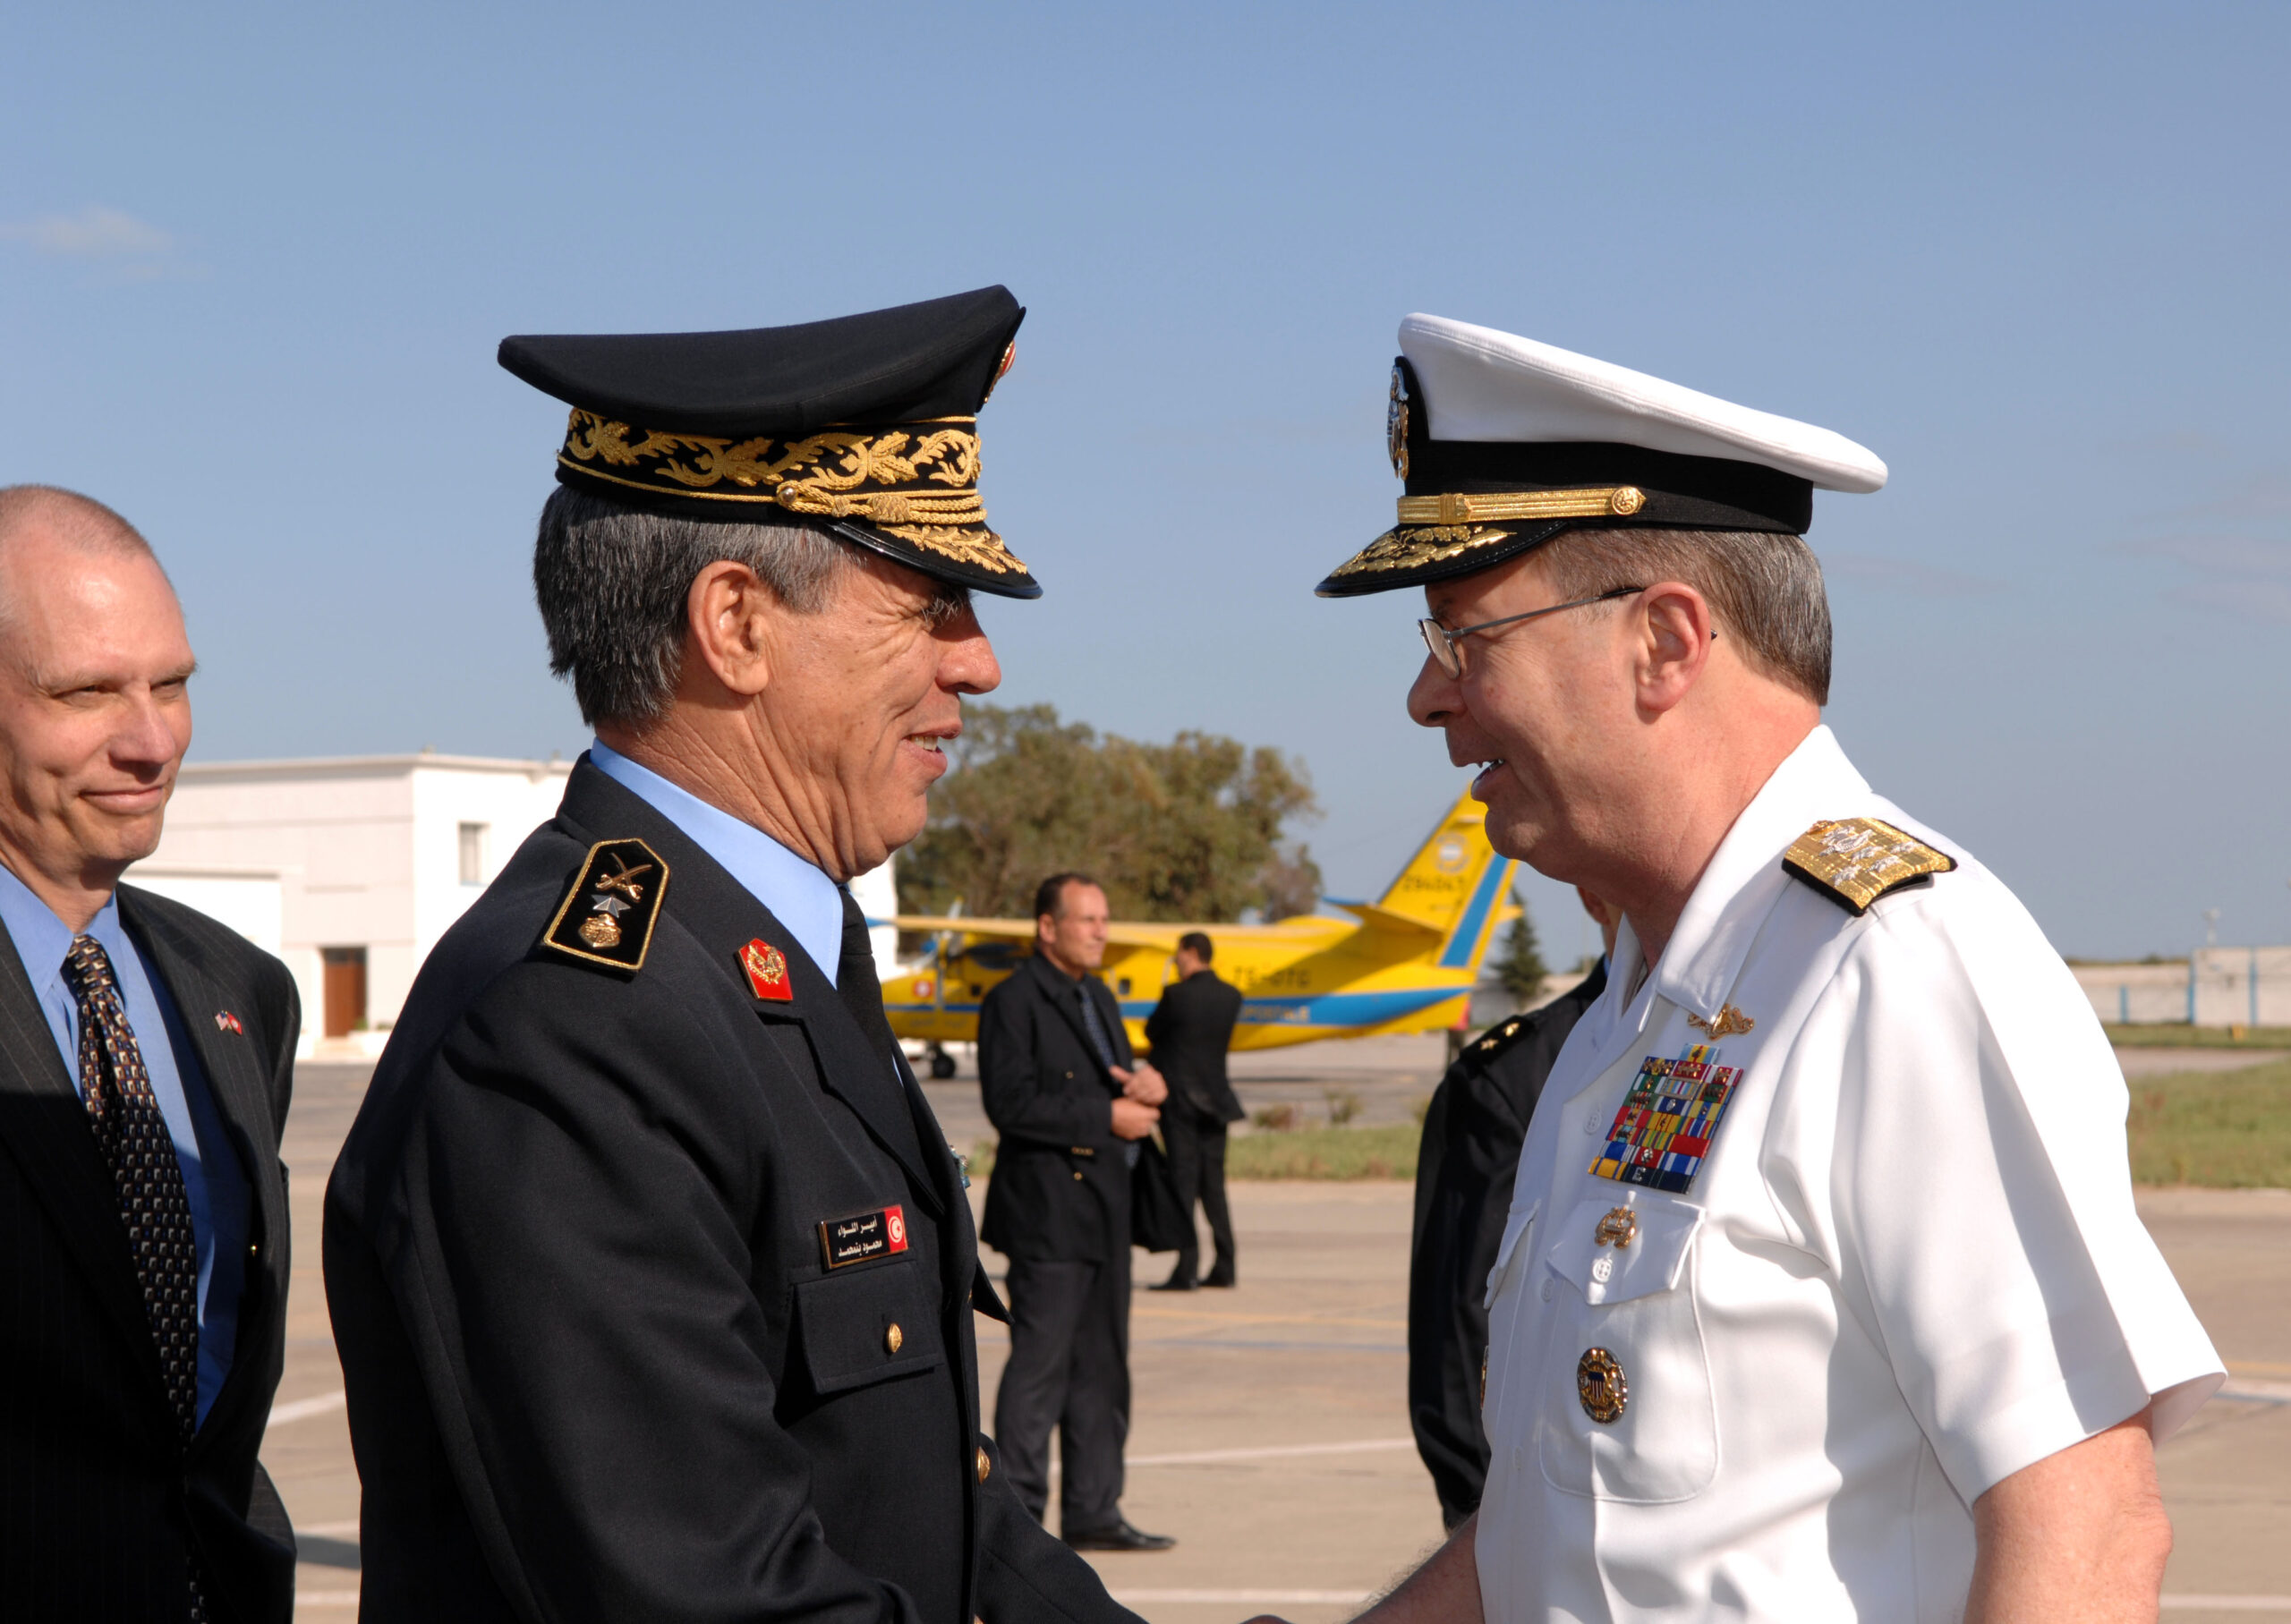 Navy Adm. Edmund P. Giambastiani, vice chairman of the Joint Chiefs of Staff, meets Tunisian Rear Adm. Tarak EL Arbi, Tunisian Navy Chief of Staff, at the Carthage Aiport in Tunis May 4. Giambastiani visited the country to meet with senior officials about Tunisian and American cooperation. Defense Dept. photo by Air Force Tech. Sgt. Adam M. Stump. (CLEARED FOR PUBLIC RELEASE)